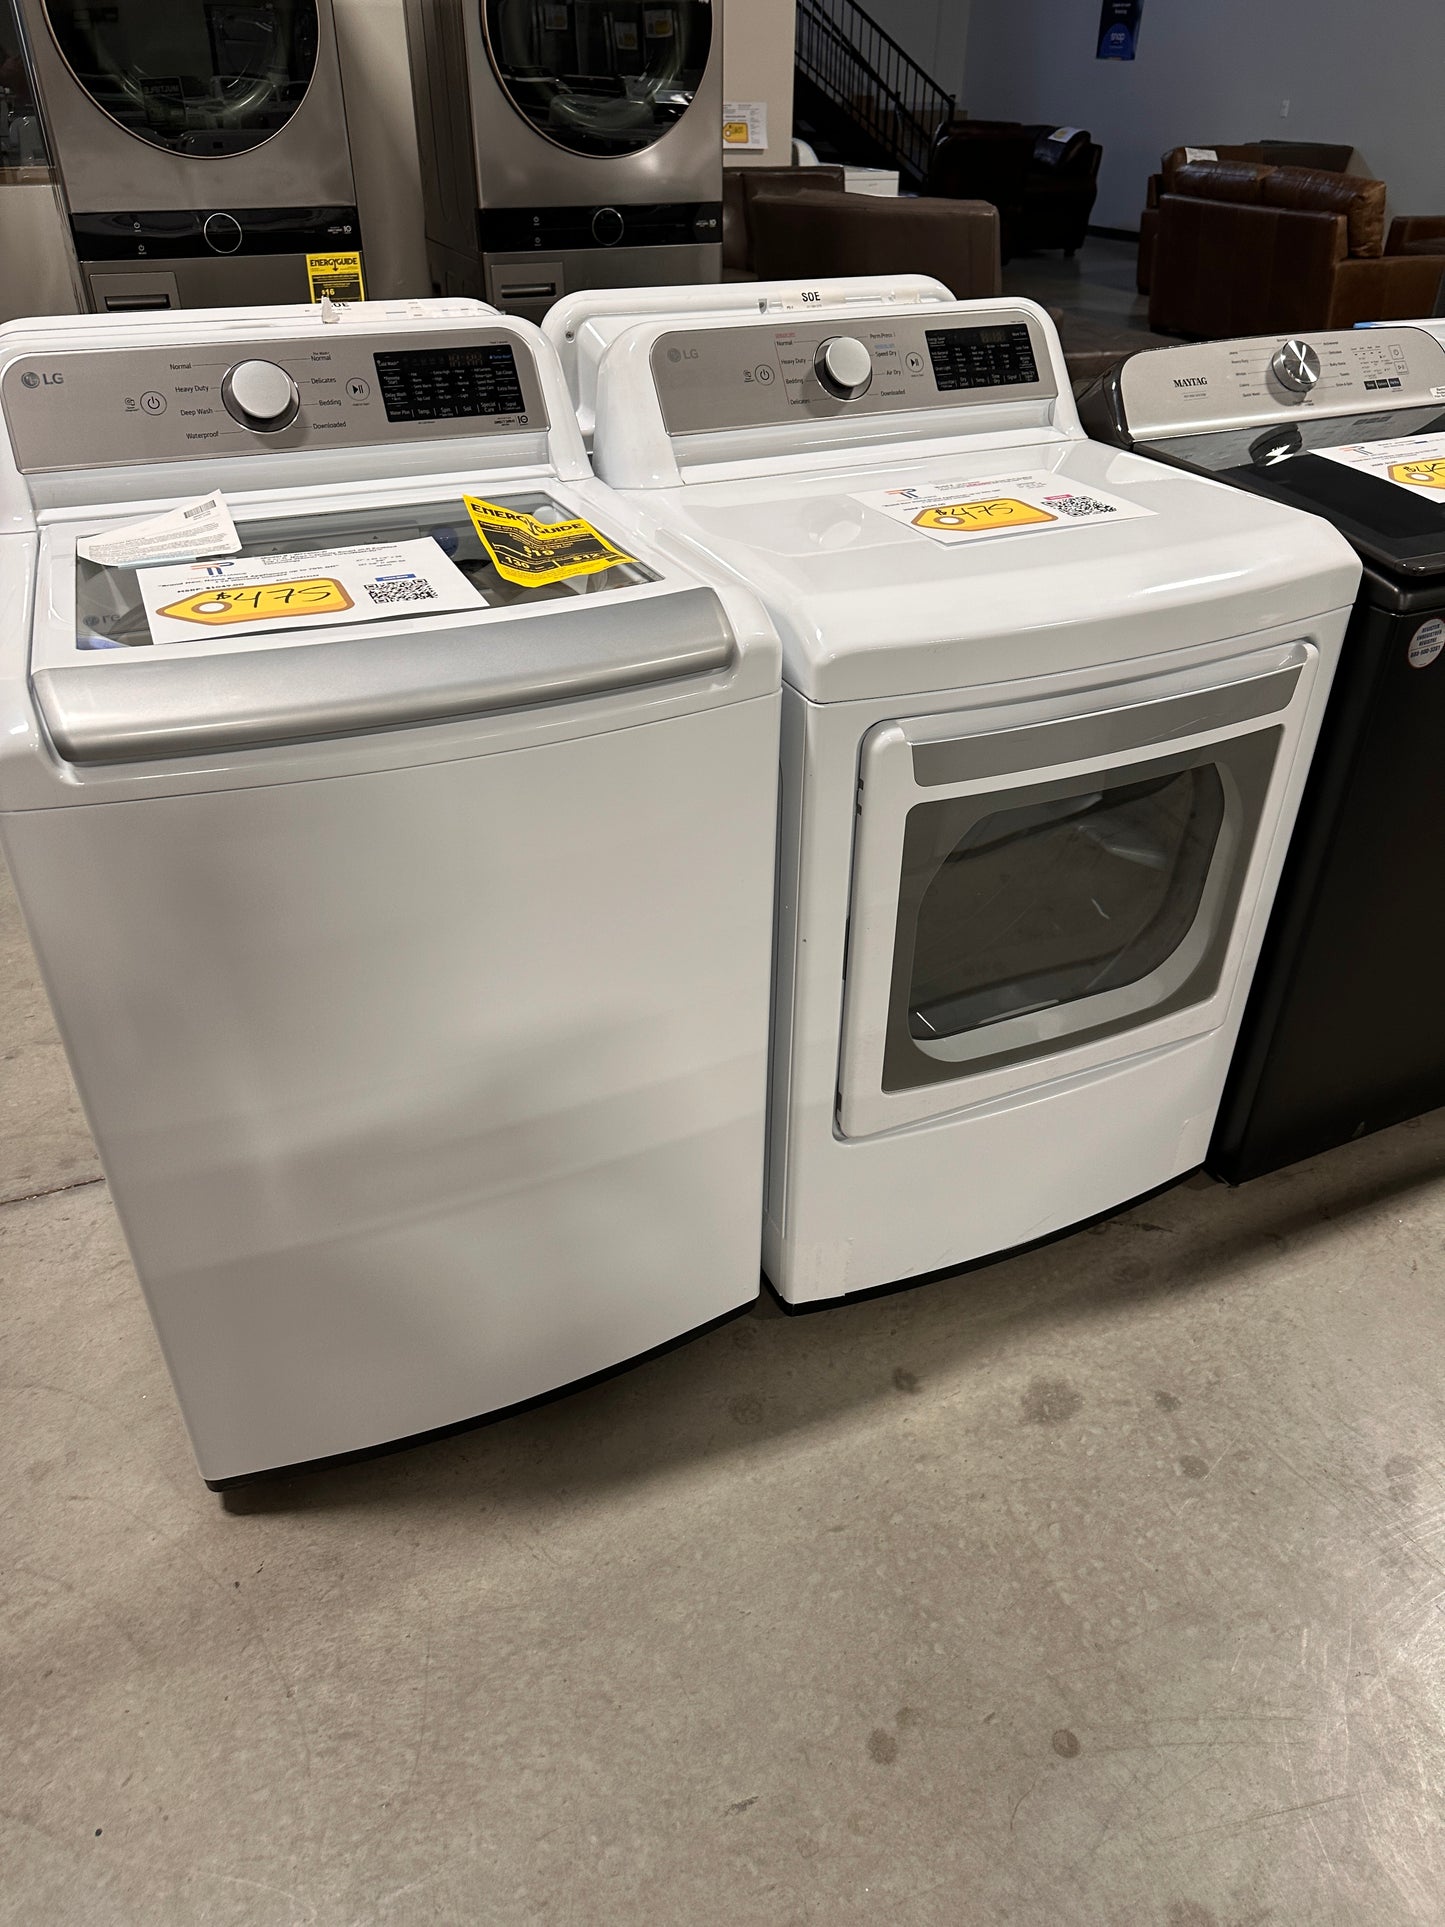 NEW LG TOP LOAD WASHER ELECTRIC DRYER LAUNDRY SET - WAS13132 DRY12449